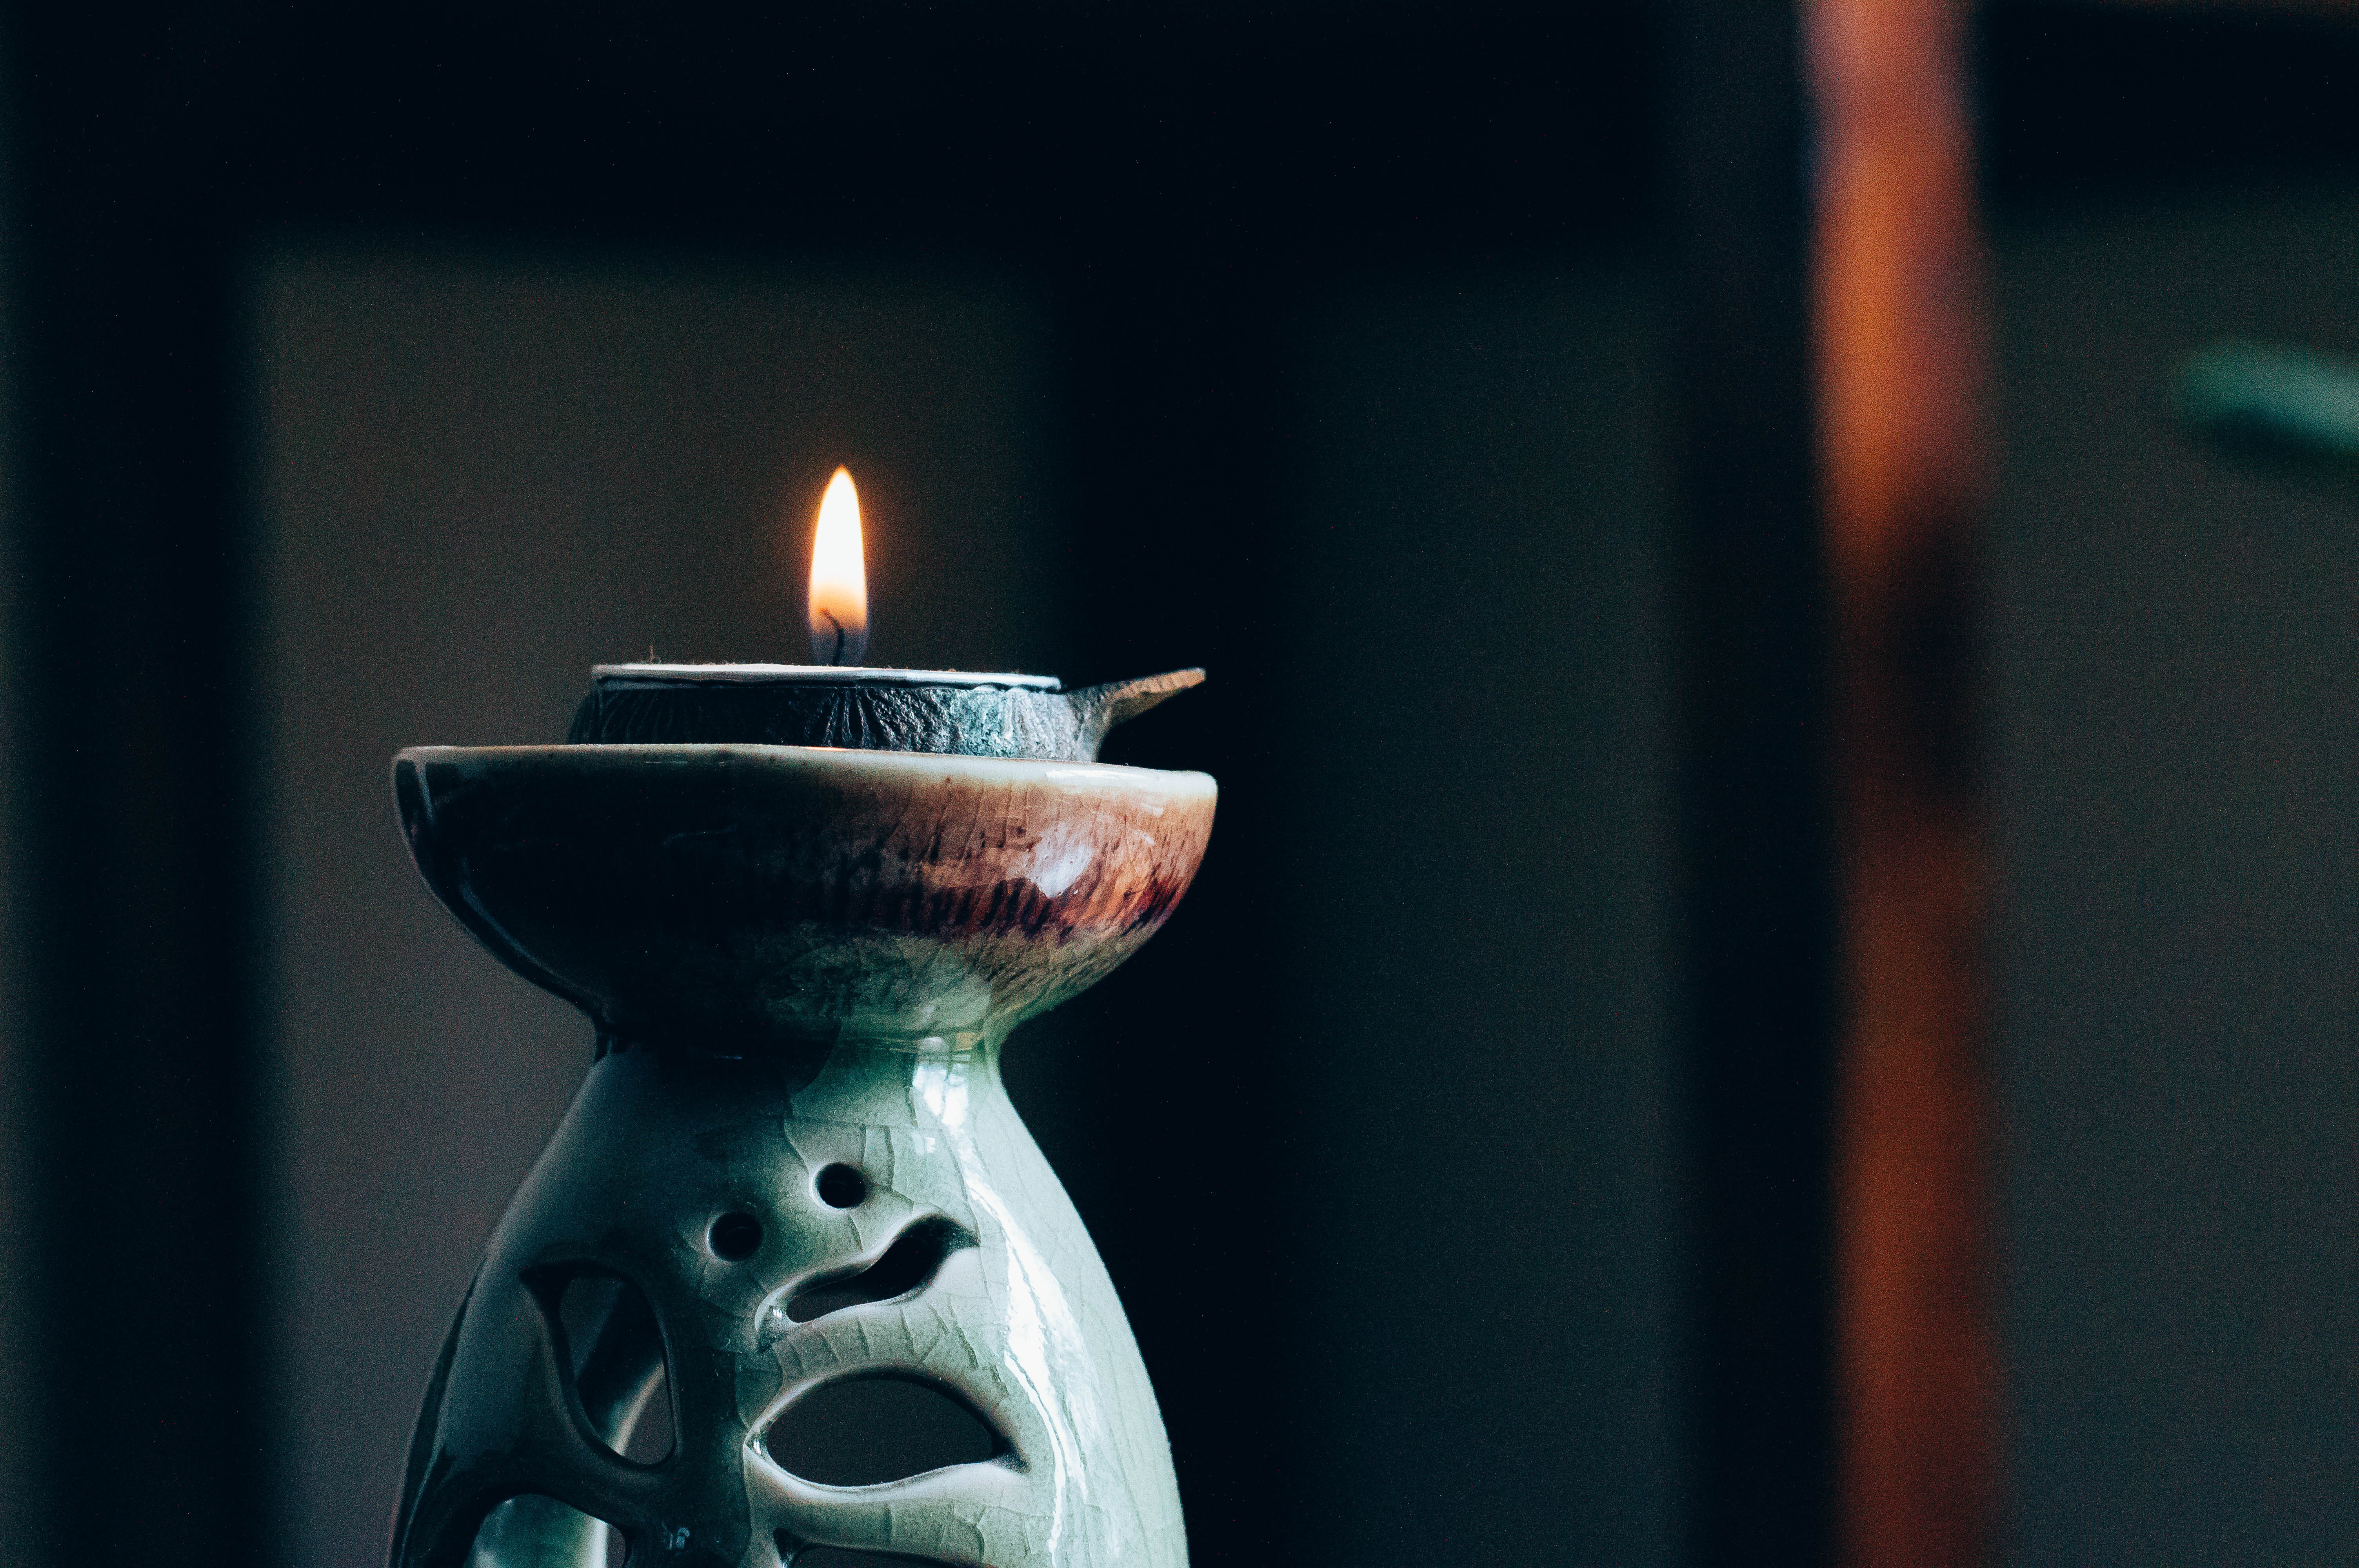 A small flame burns on a ceramic green candle holder